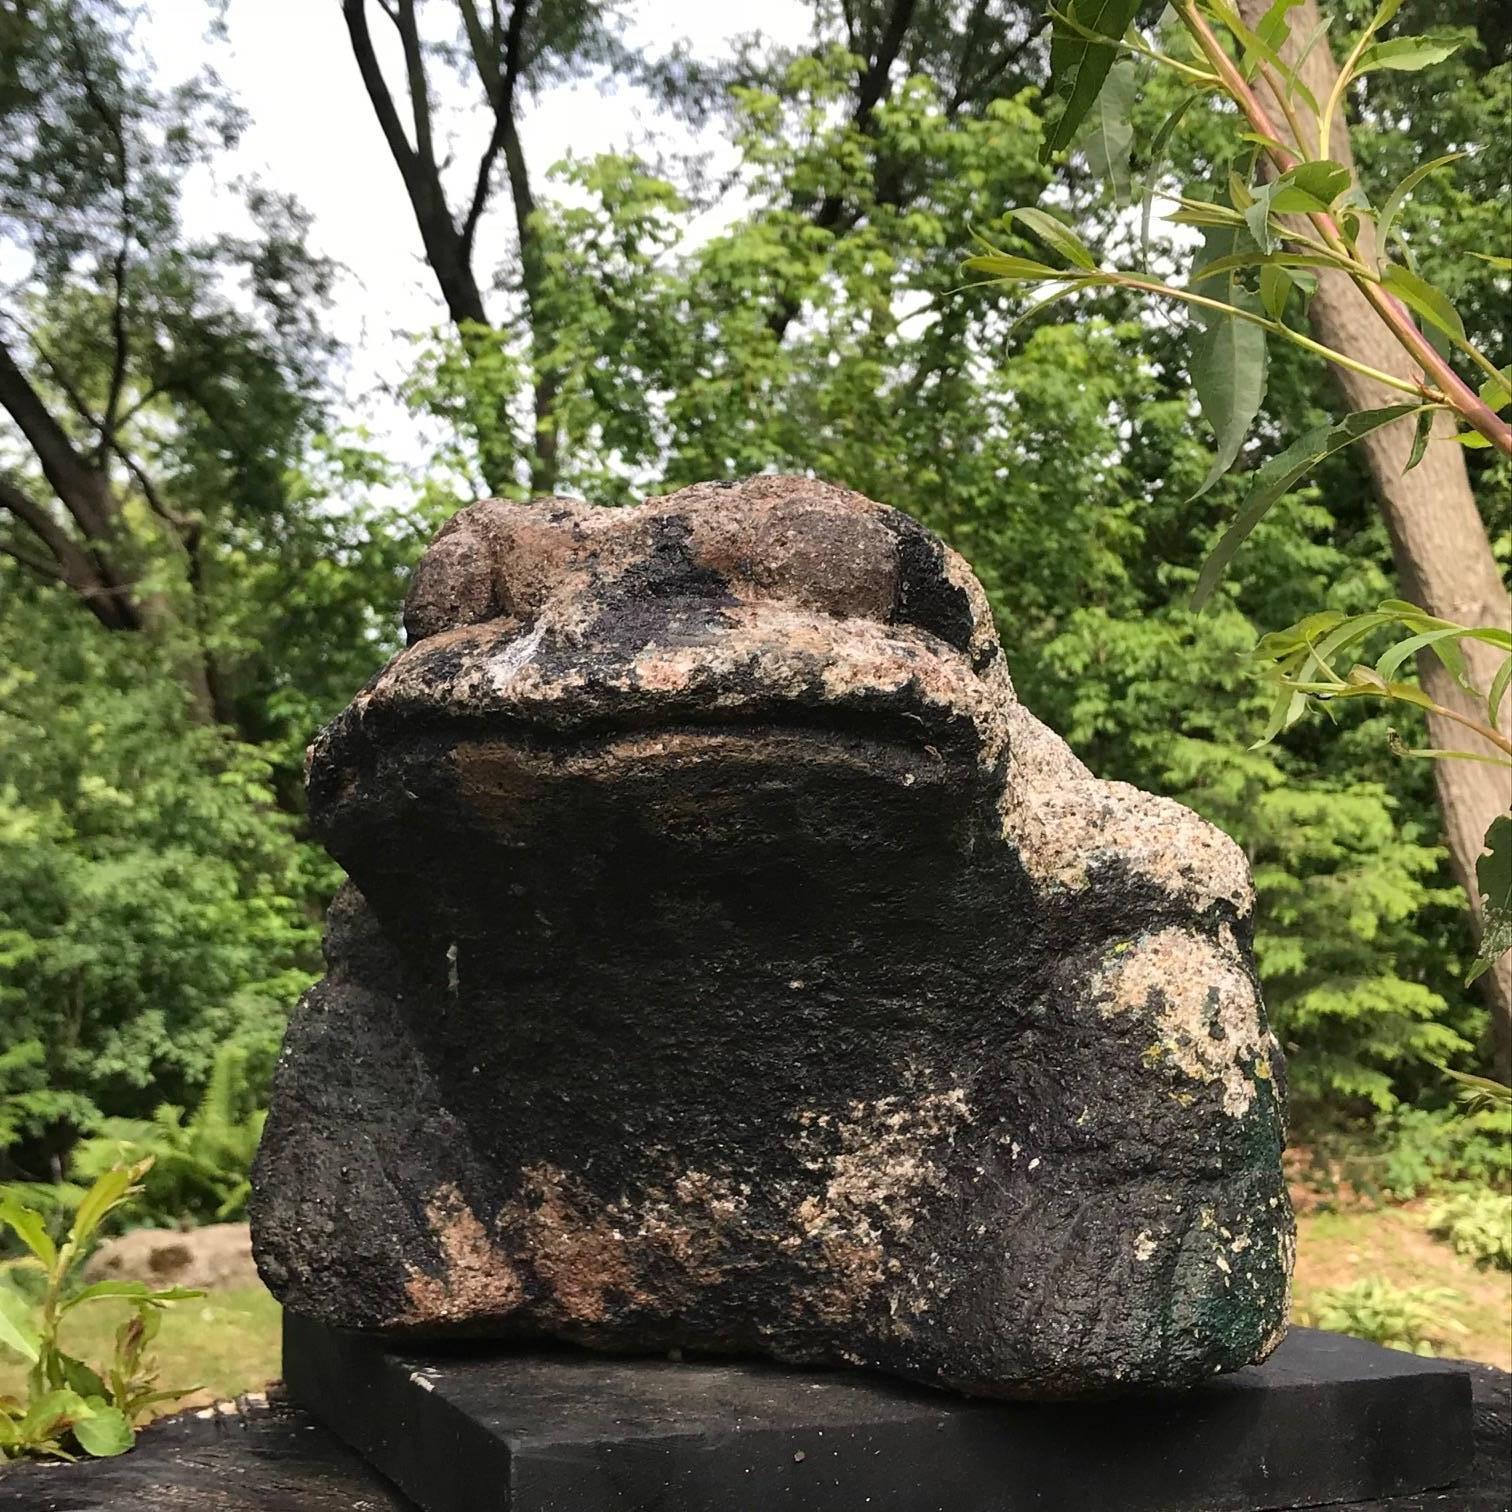 Hand-Carved Giant Burly Japanese Antique Stone Frog Found In Vermont Tree, 17